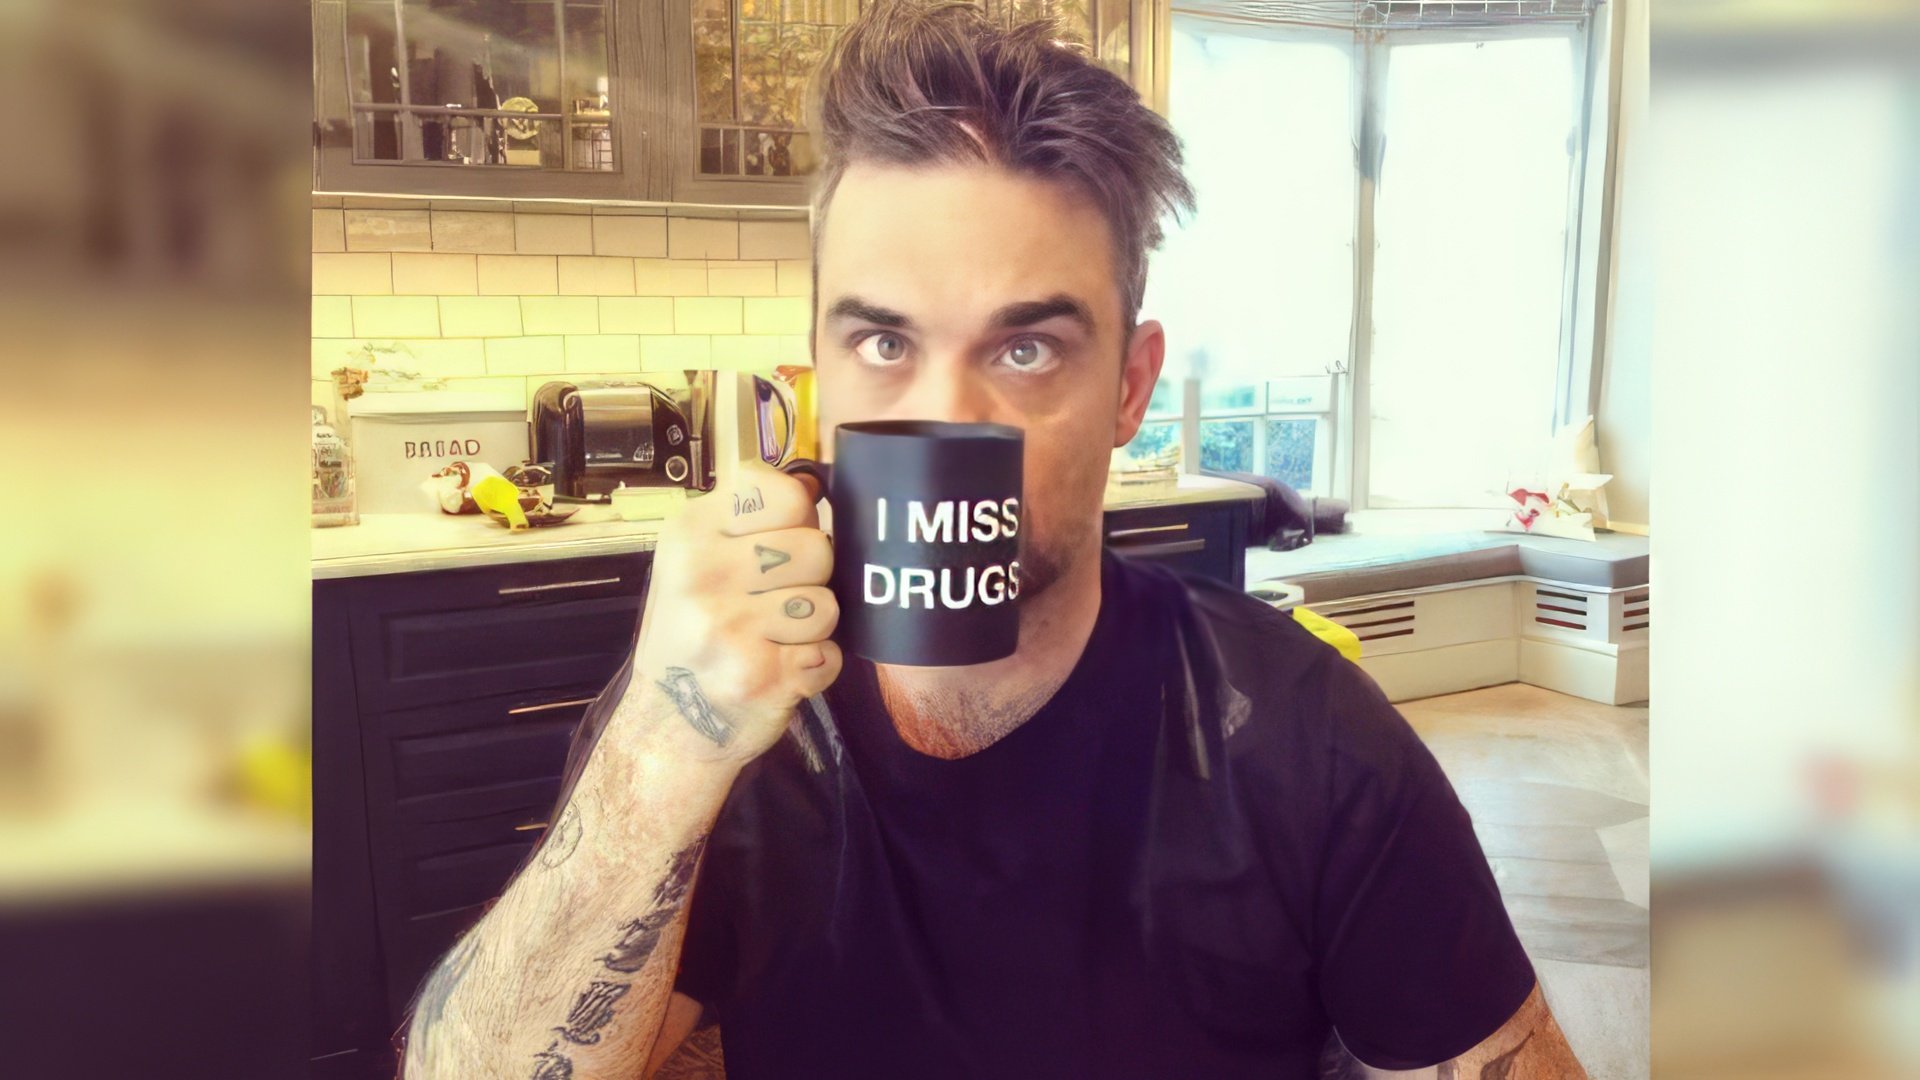 Robbie Williams has been drug-free since then